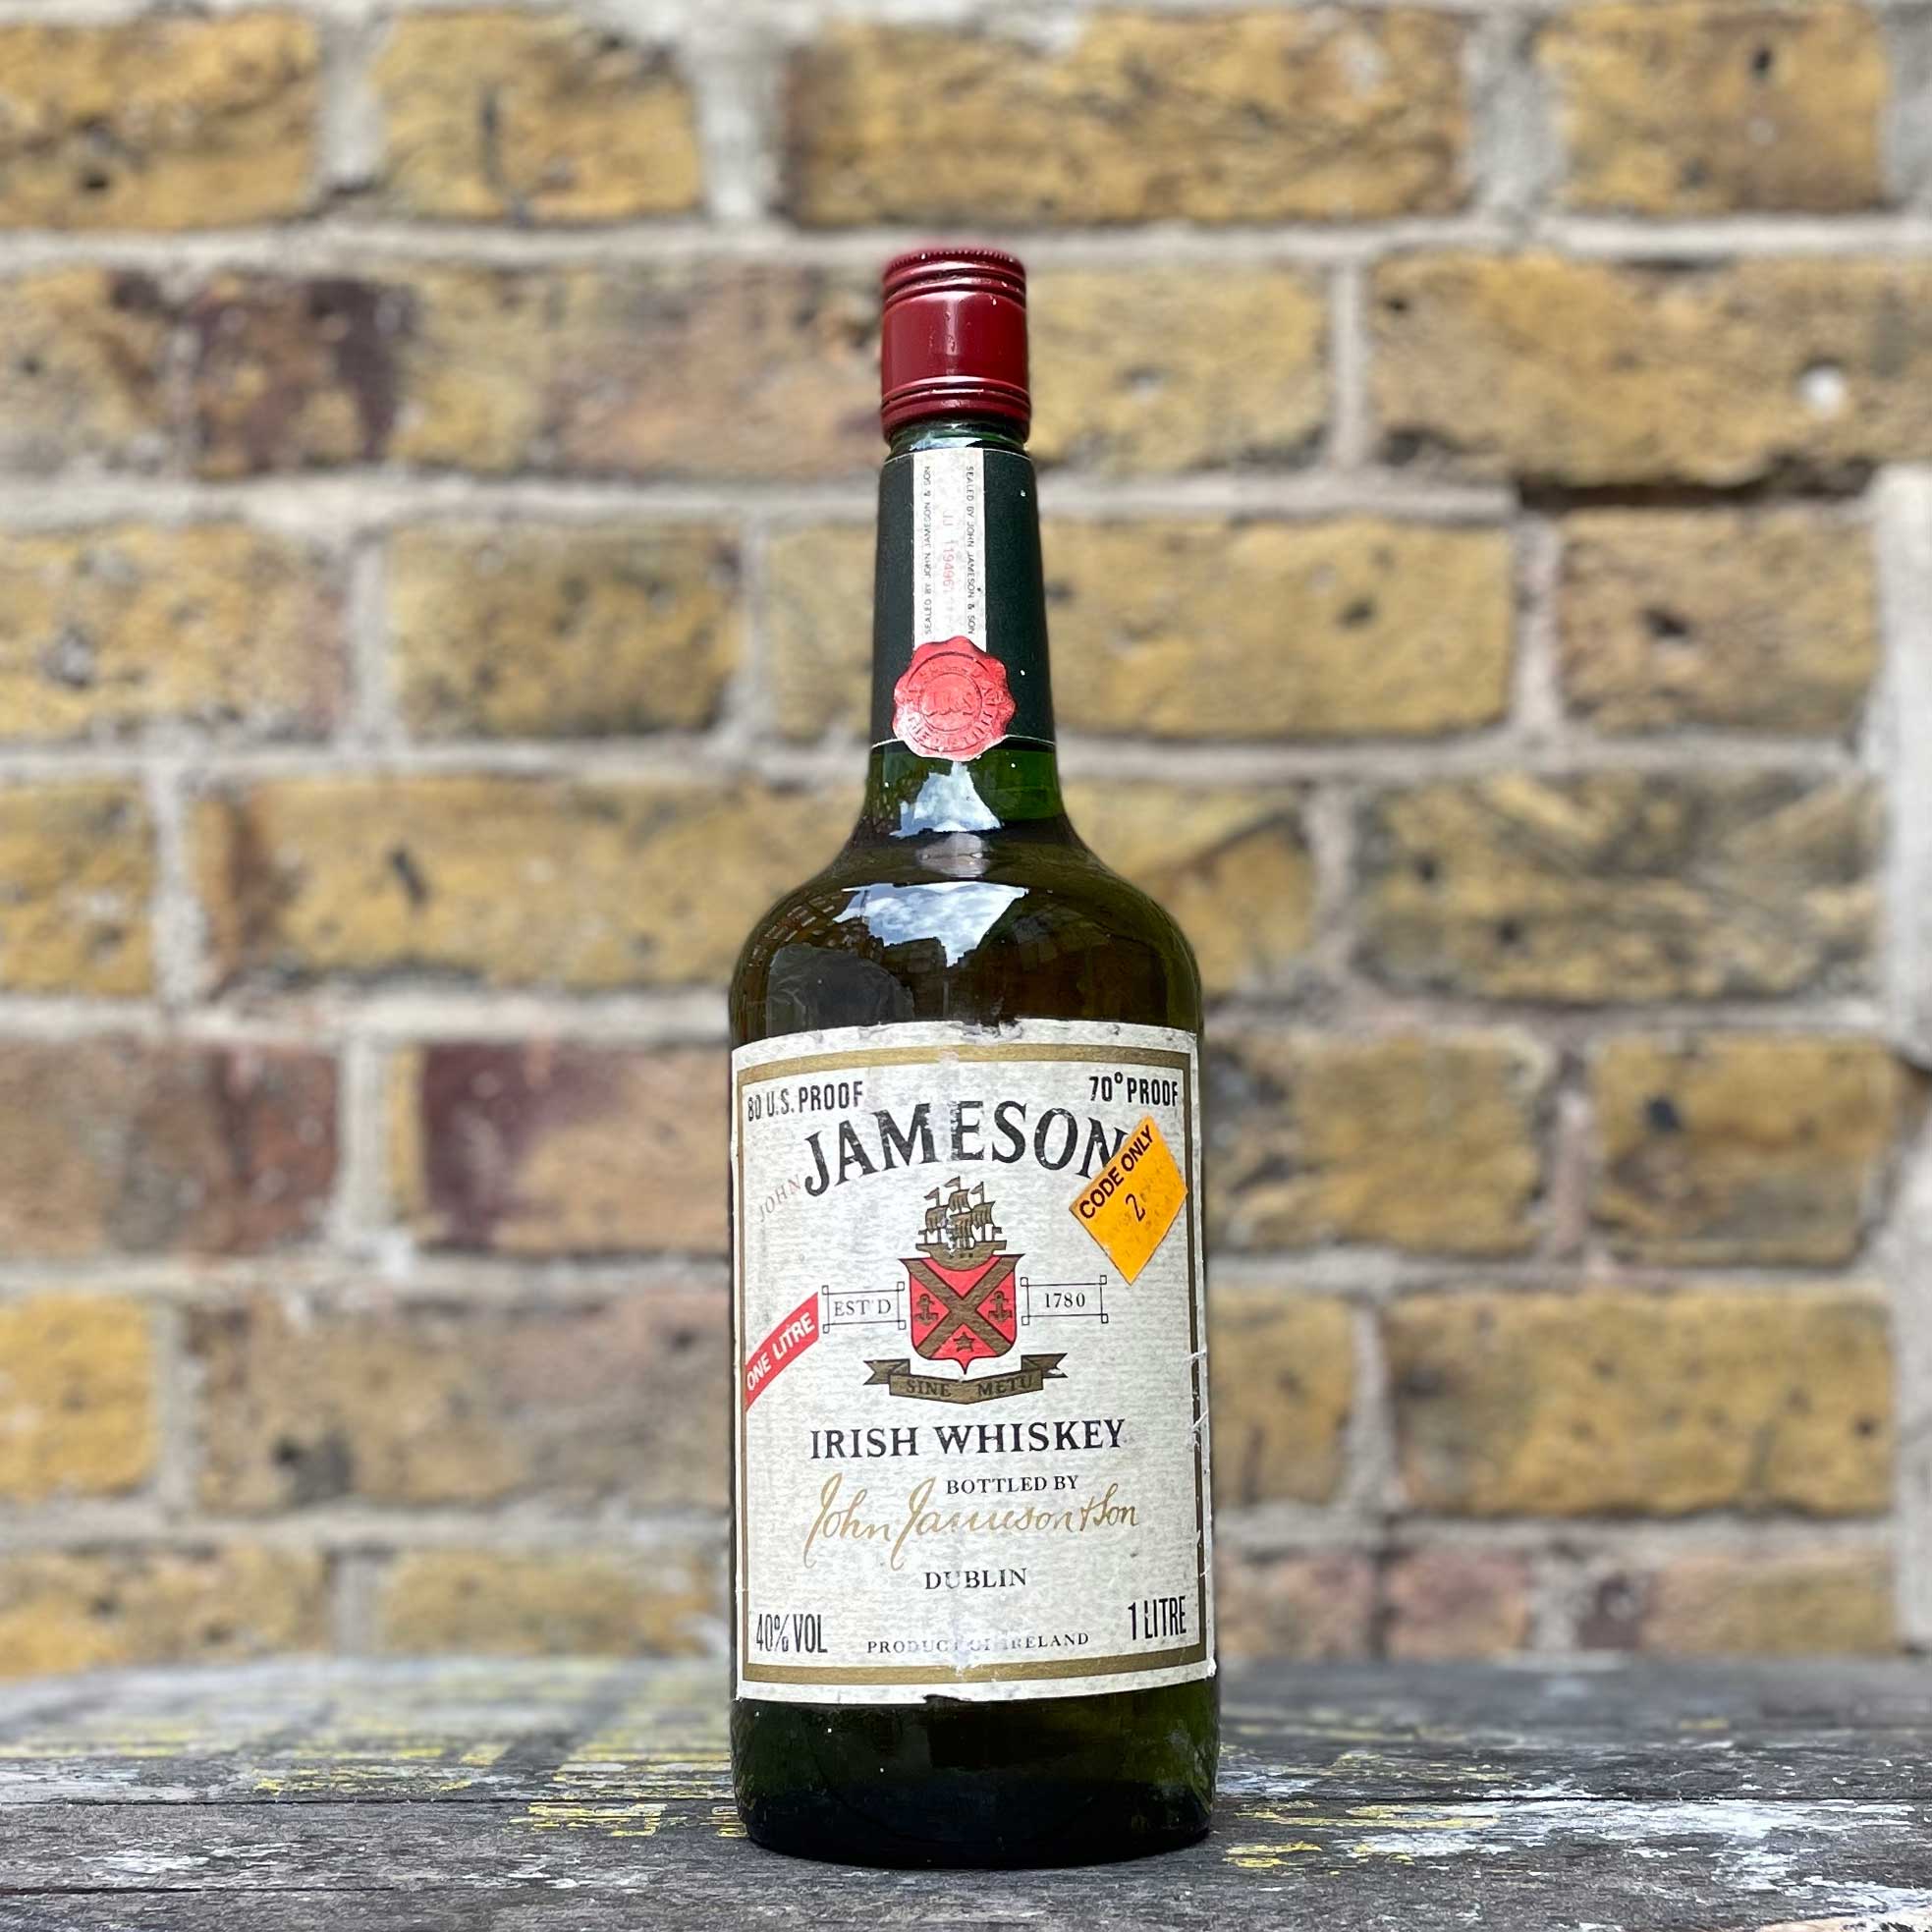 https://theumbrellaproject.co.uk/wp-content/uploads/2022/09/Jameson-Irish-Whiskey-1970-1980s-The-Umbrella-Project-online-shop-square-01.jpg